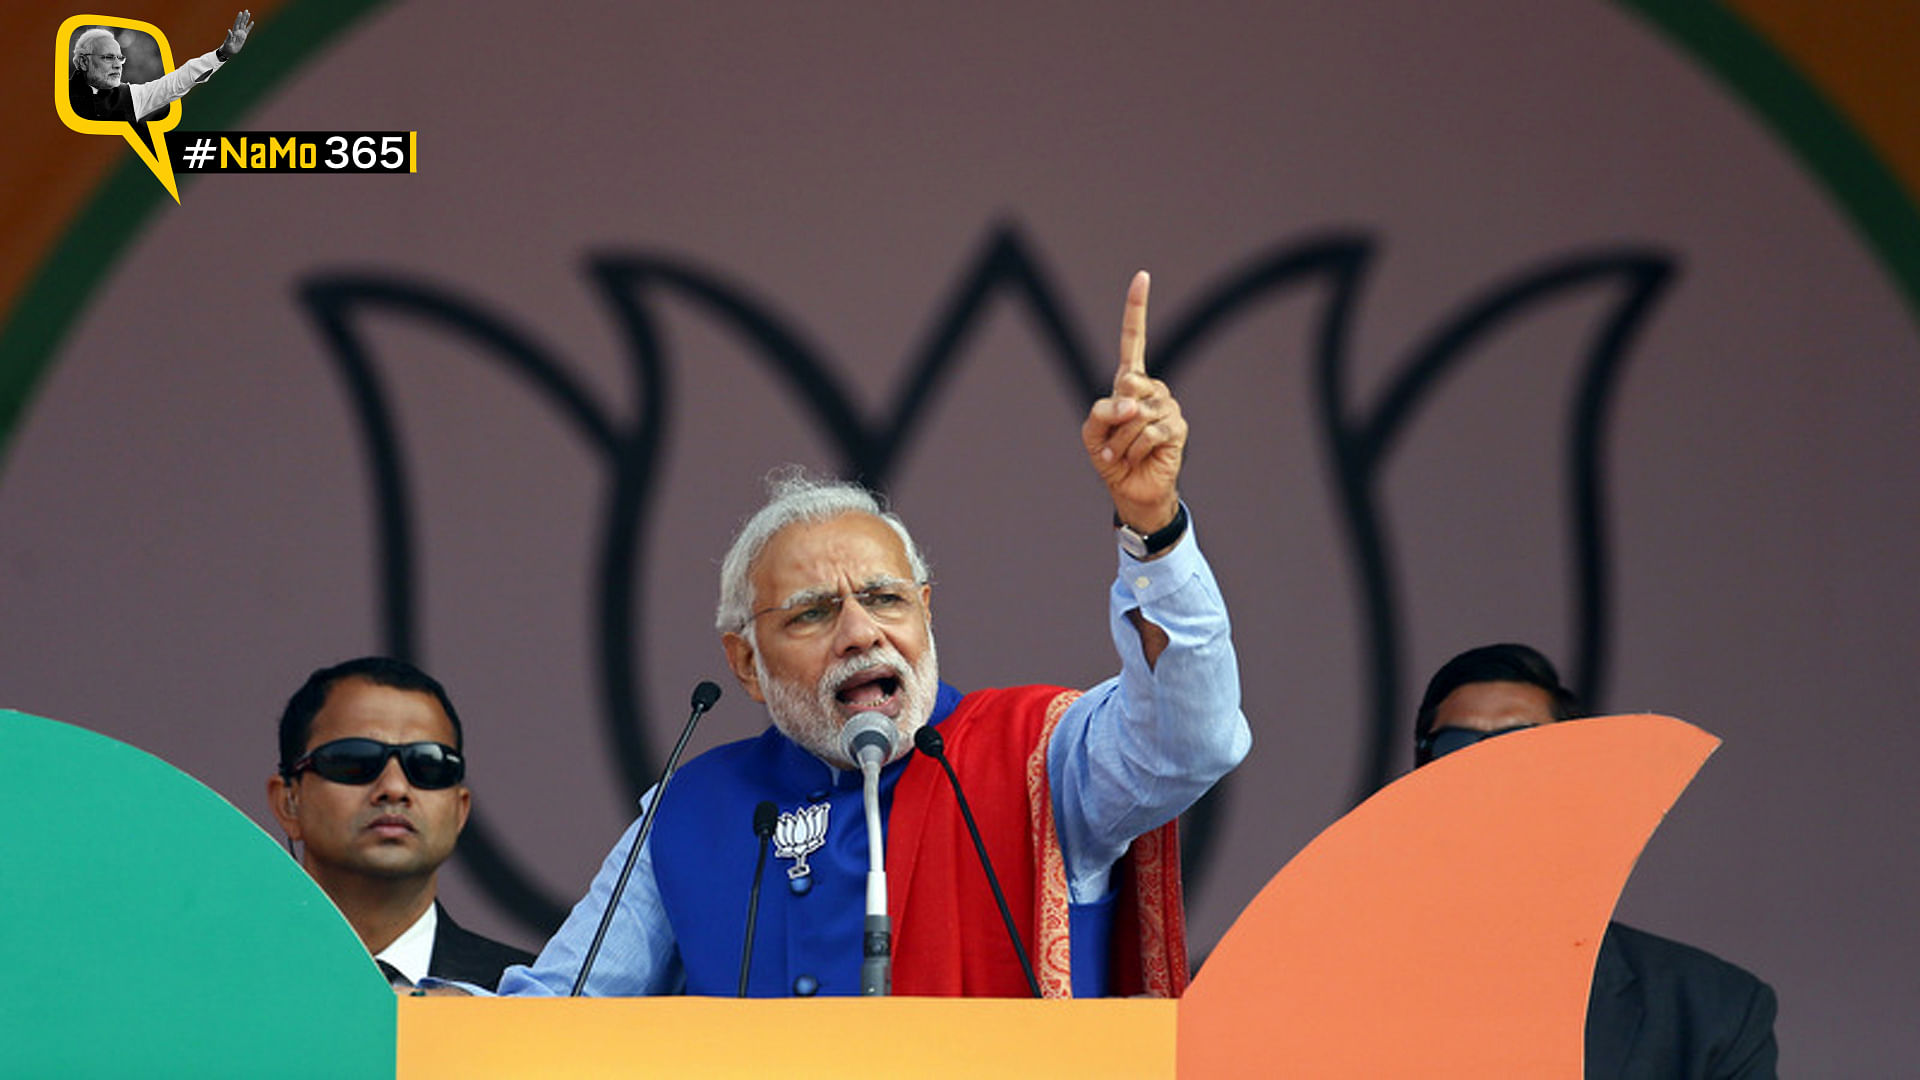 Prime Minister Narendra Modi addresses a campaign rally ahead of state assembly elections, Ramlila ground, New Delhi, January, 2015. (Photo: Reuters)